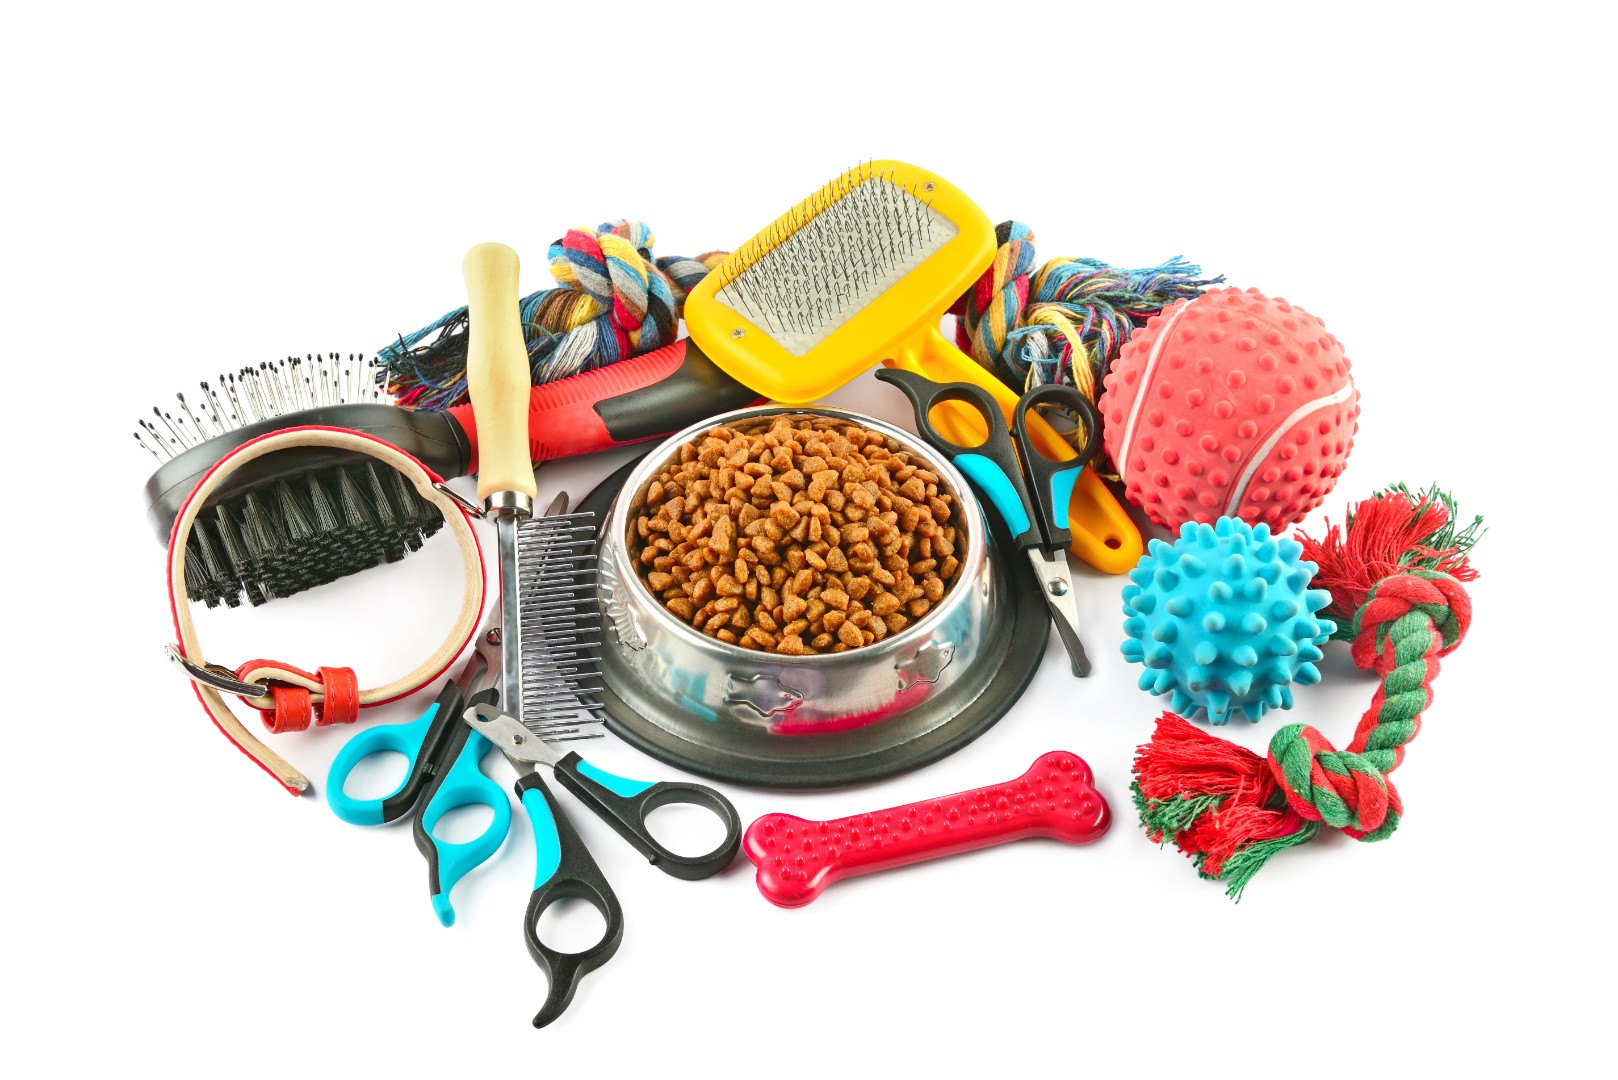 Quality Pet Food, Supplies & Grooming